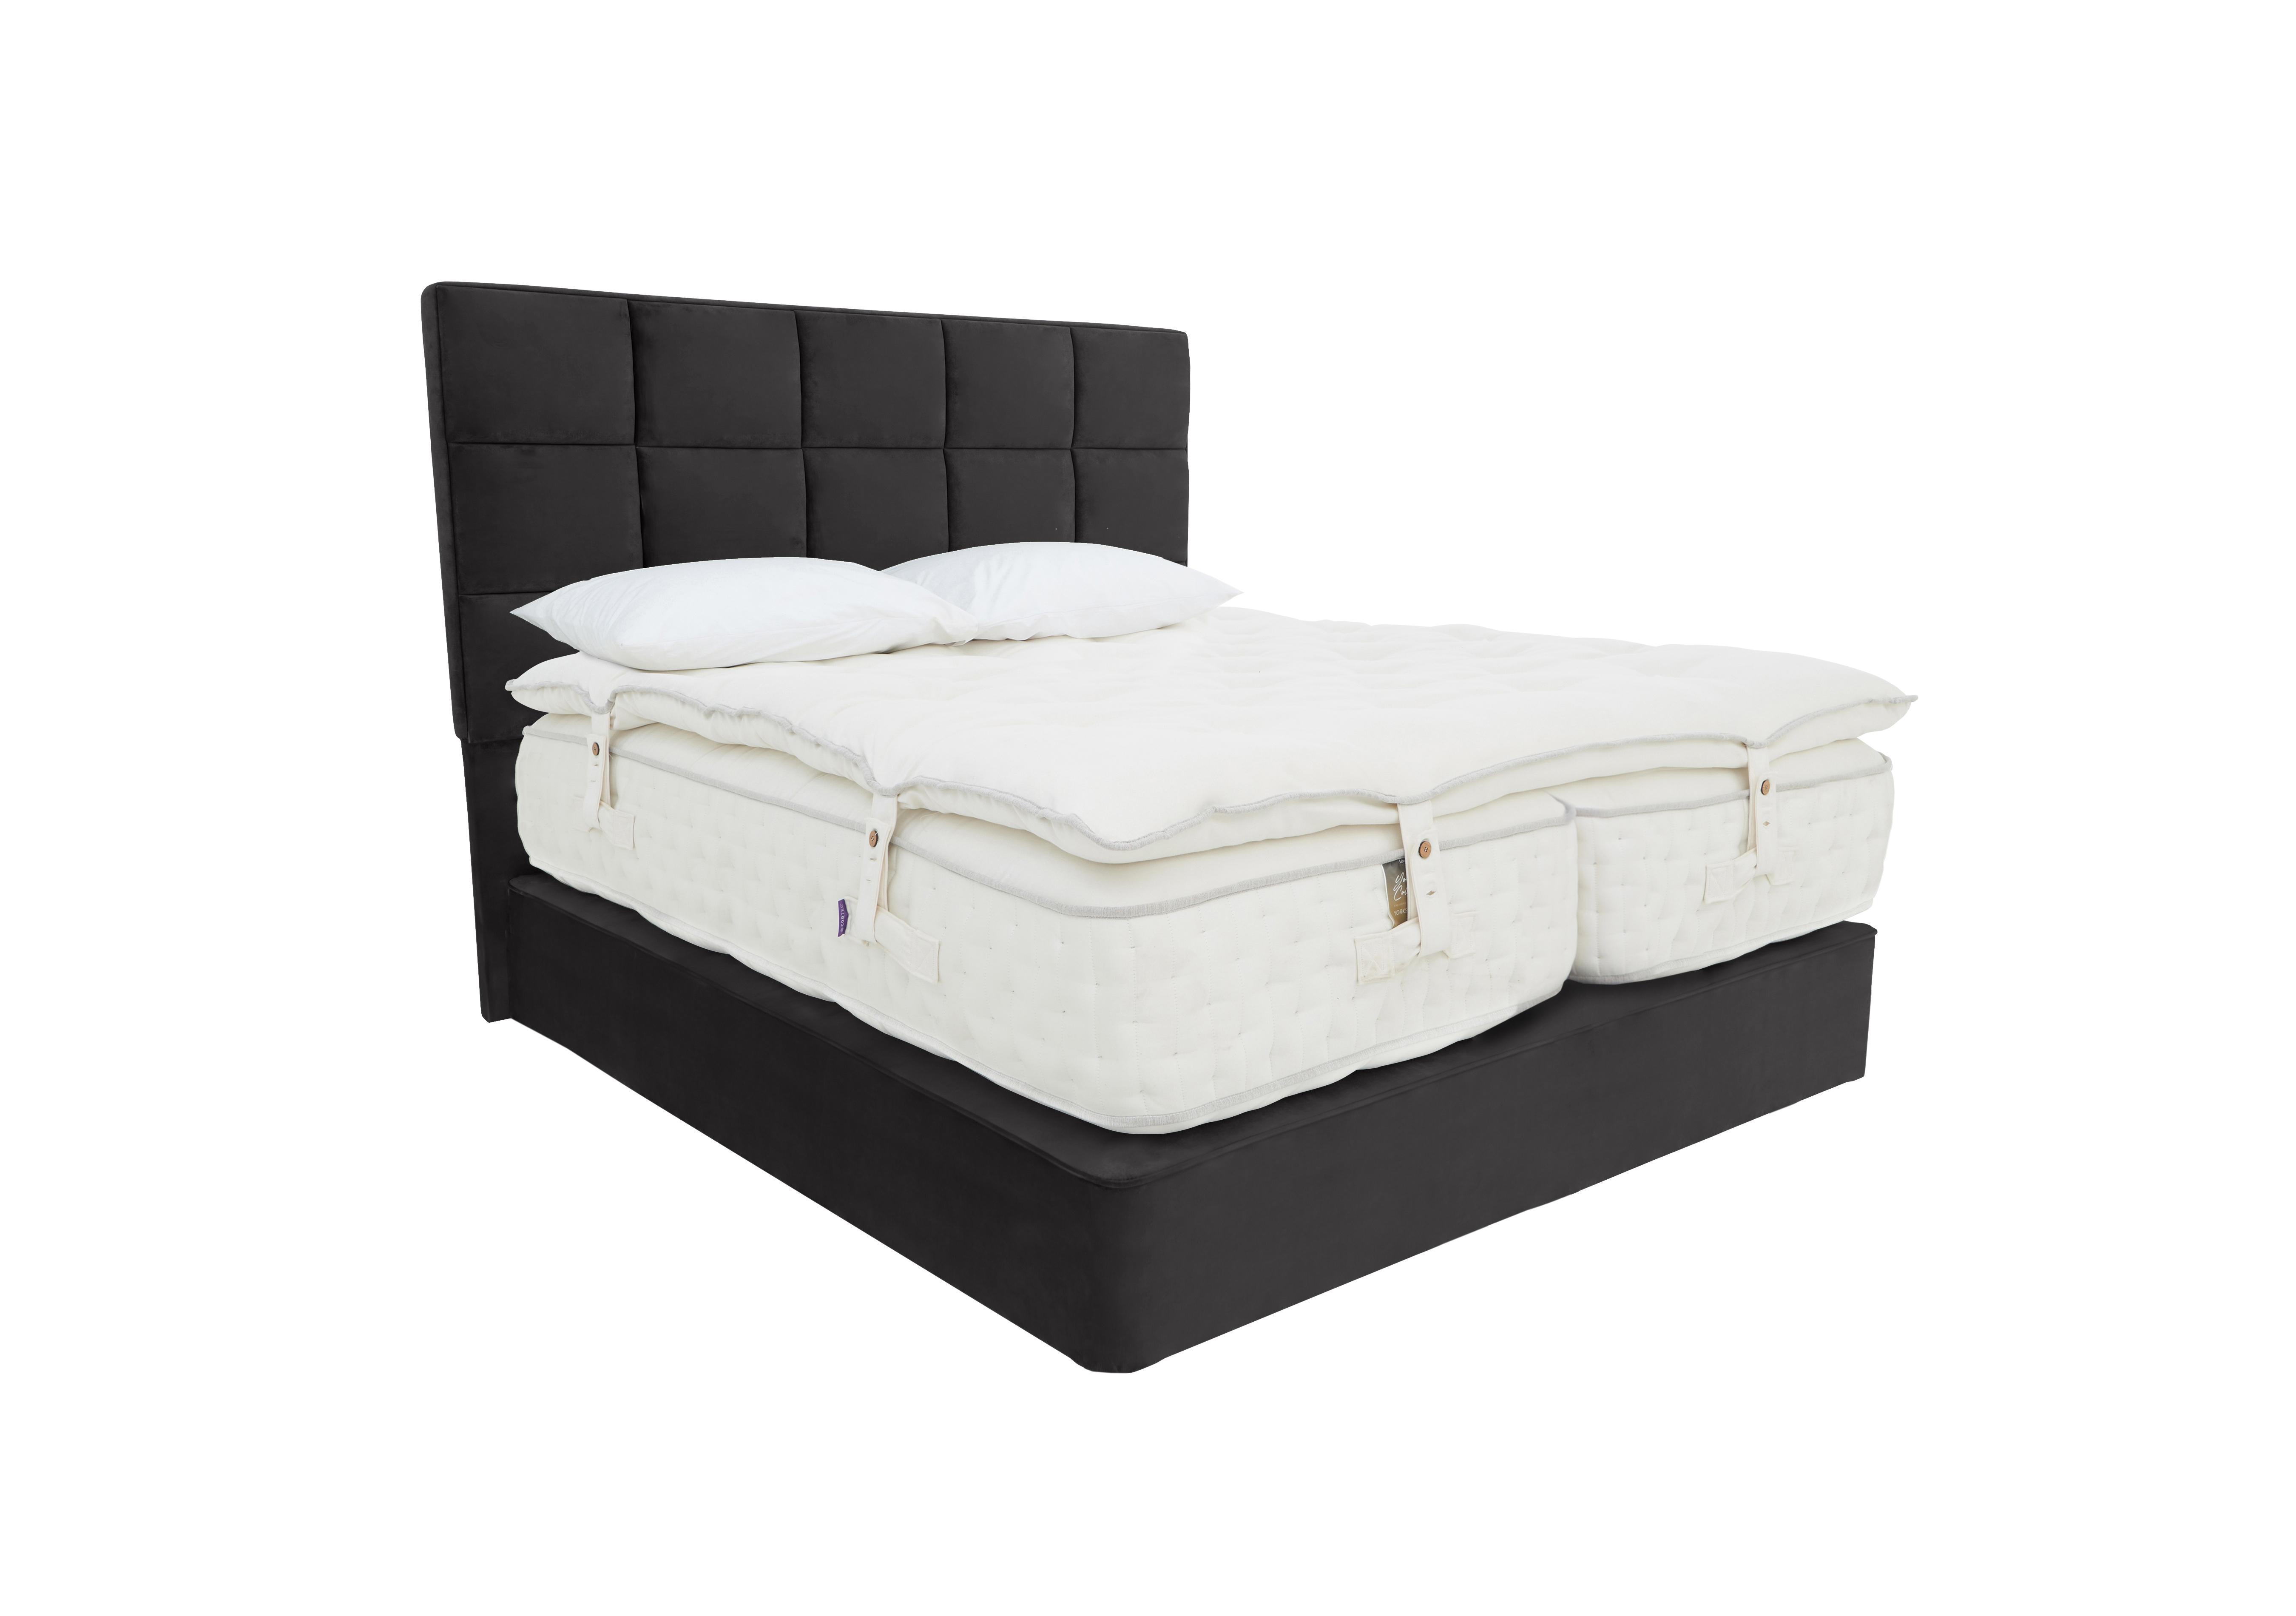 Yorkshire 30K Divan Set with Zip and Link Mattress with Mattress Topper in Seven Anthracite on Furniture Village